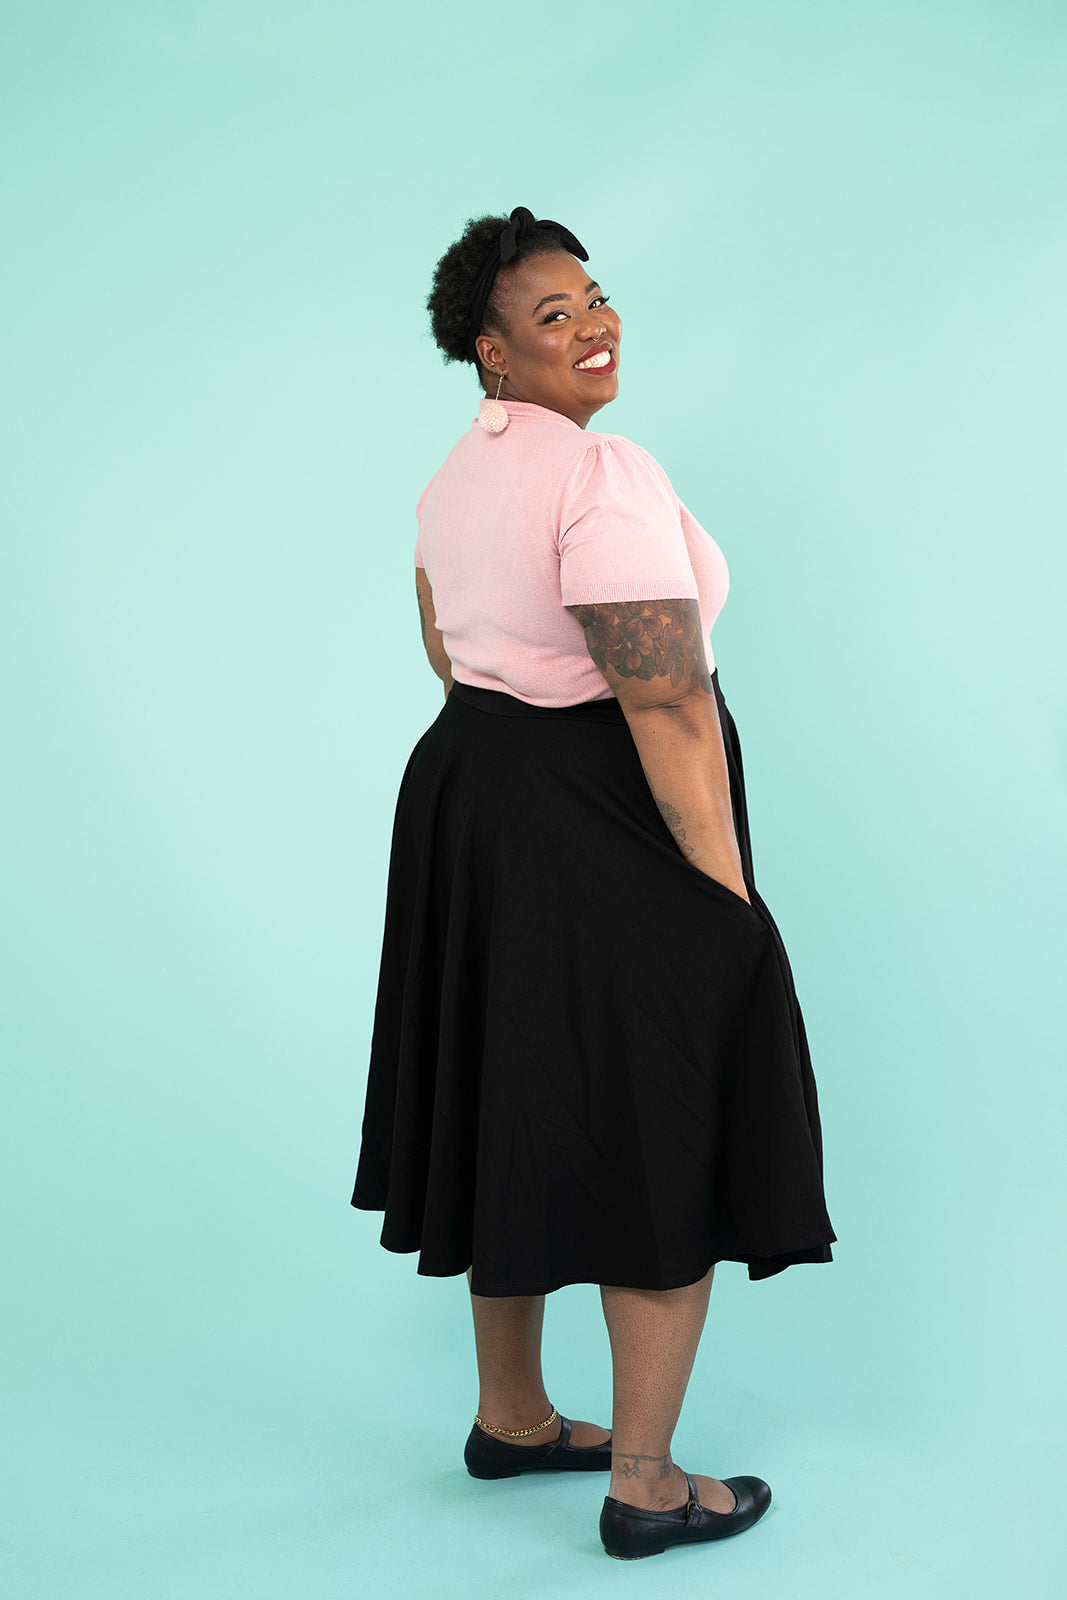 A black woman is turned away but looking at the camera and smiling. She is wearing a pink top and pompom earrings and a black skirt.